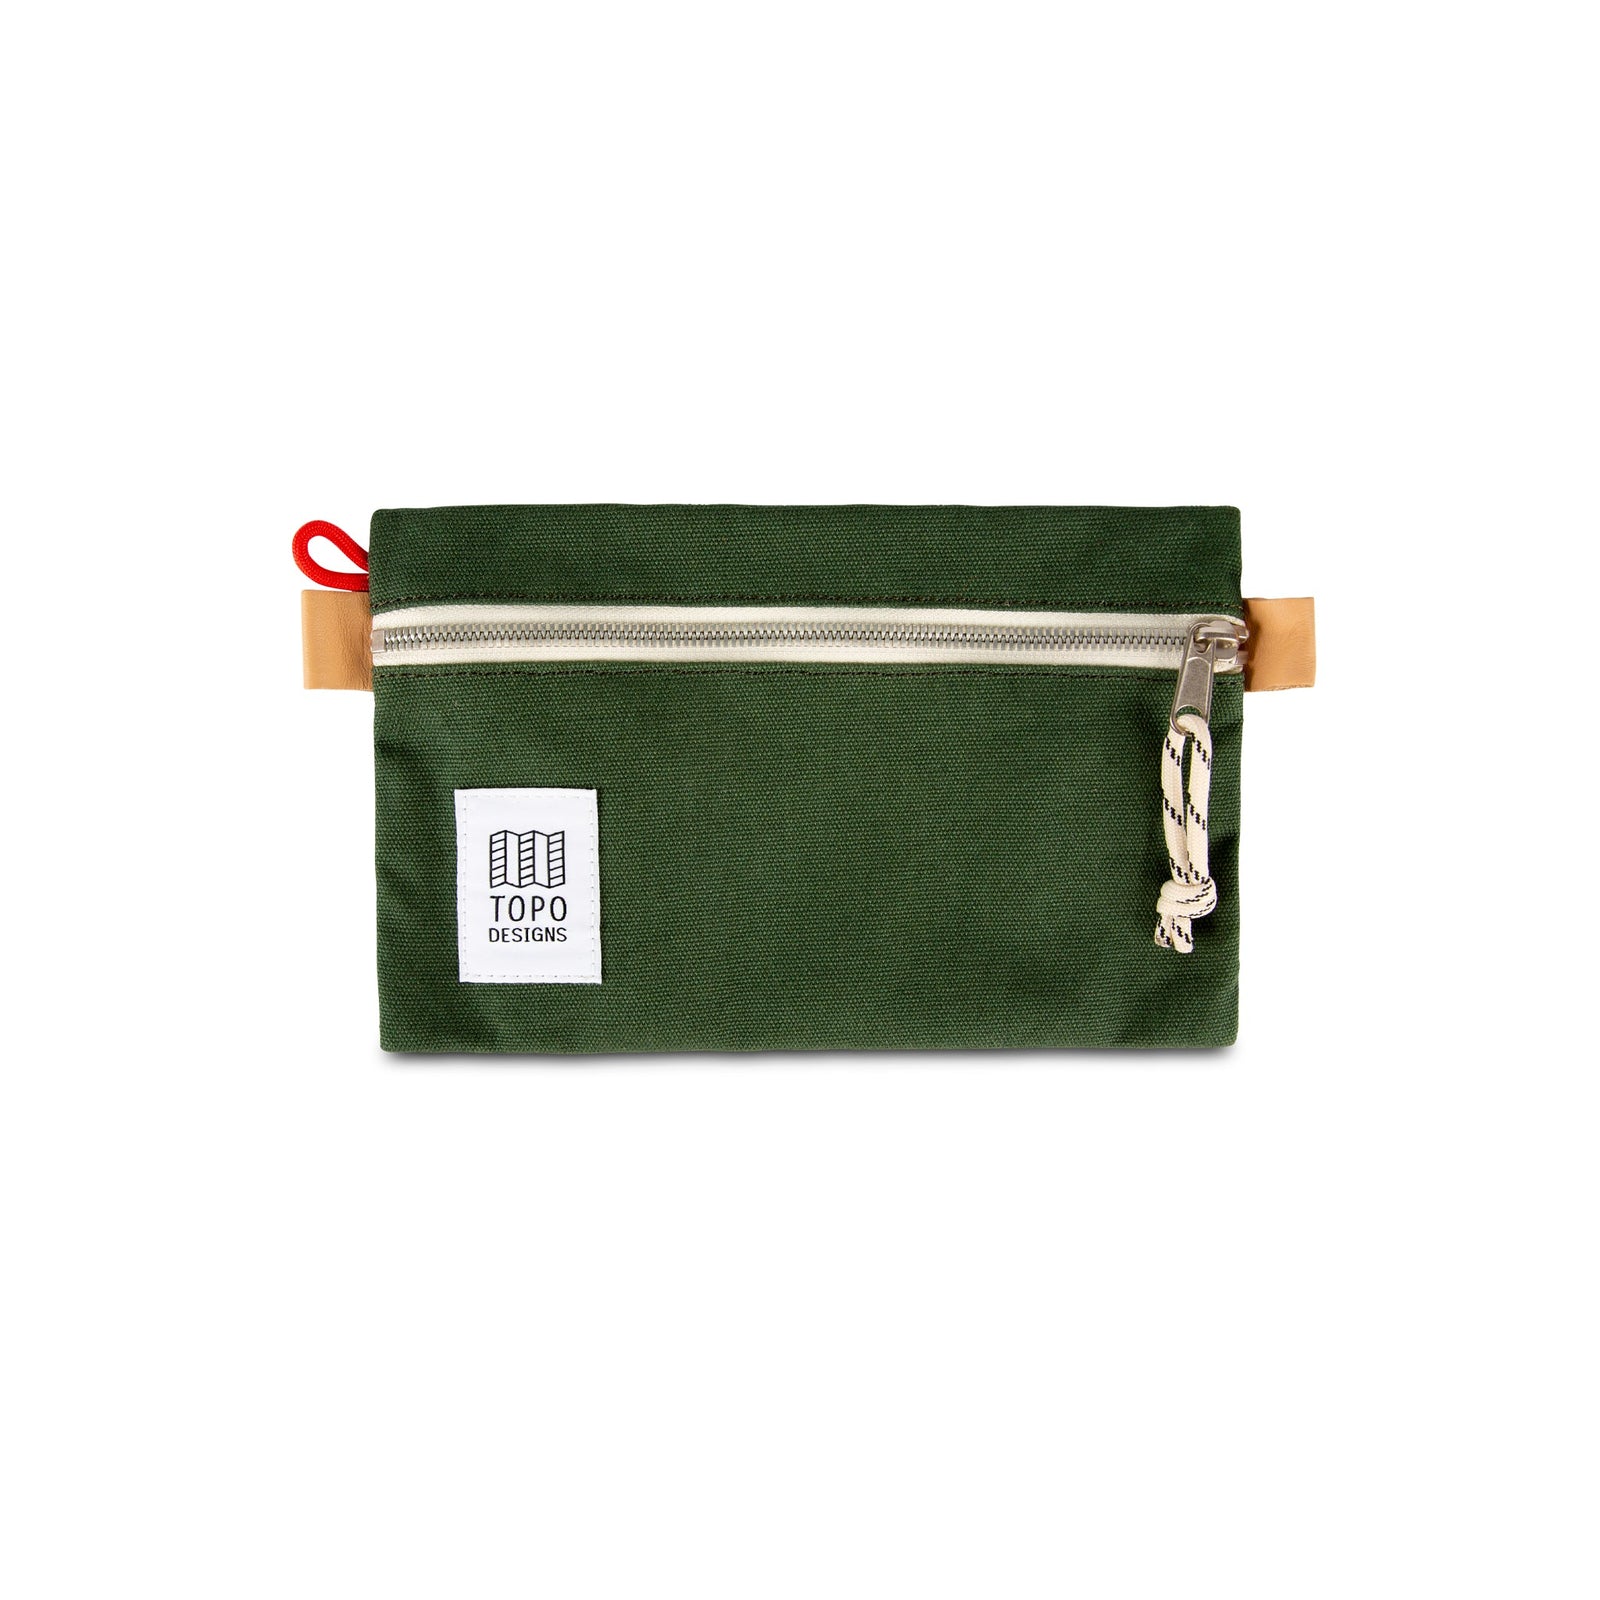 Front product shot of Topo Designs Accessory Bag "Small" in "Forest" green canvas.